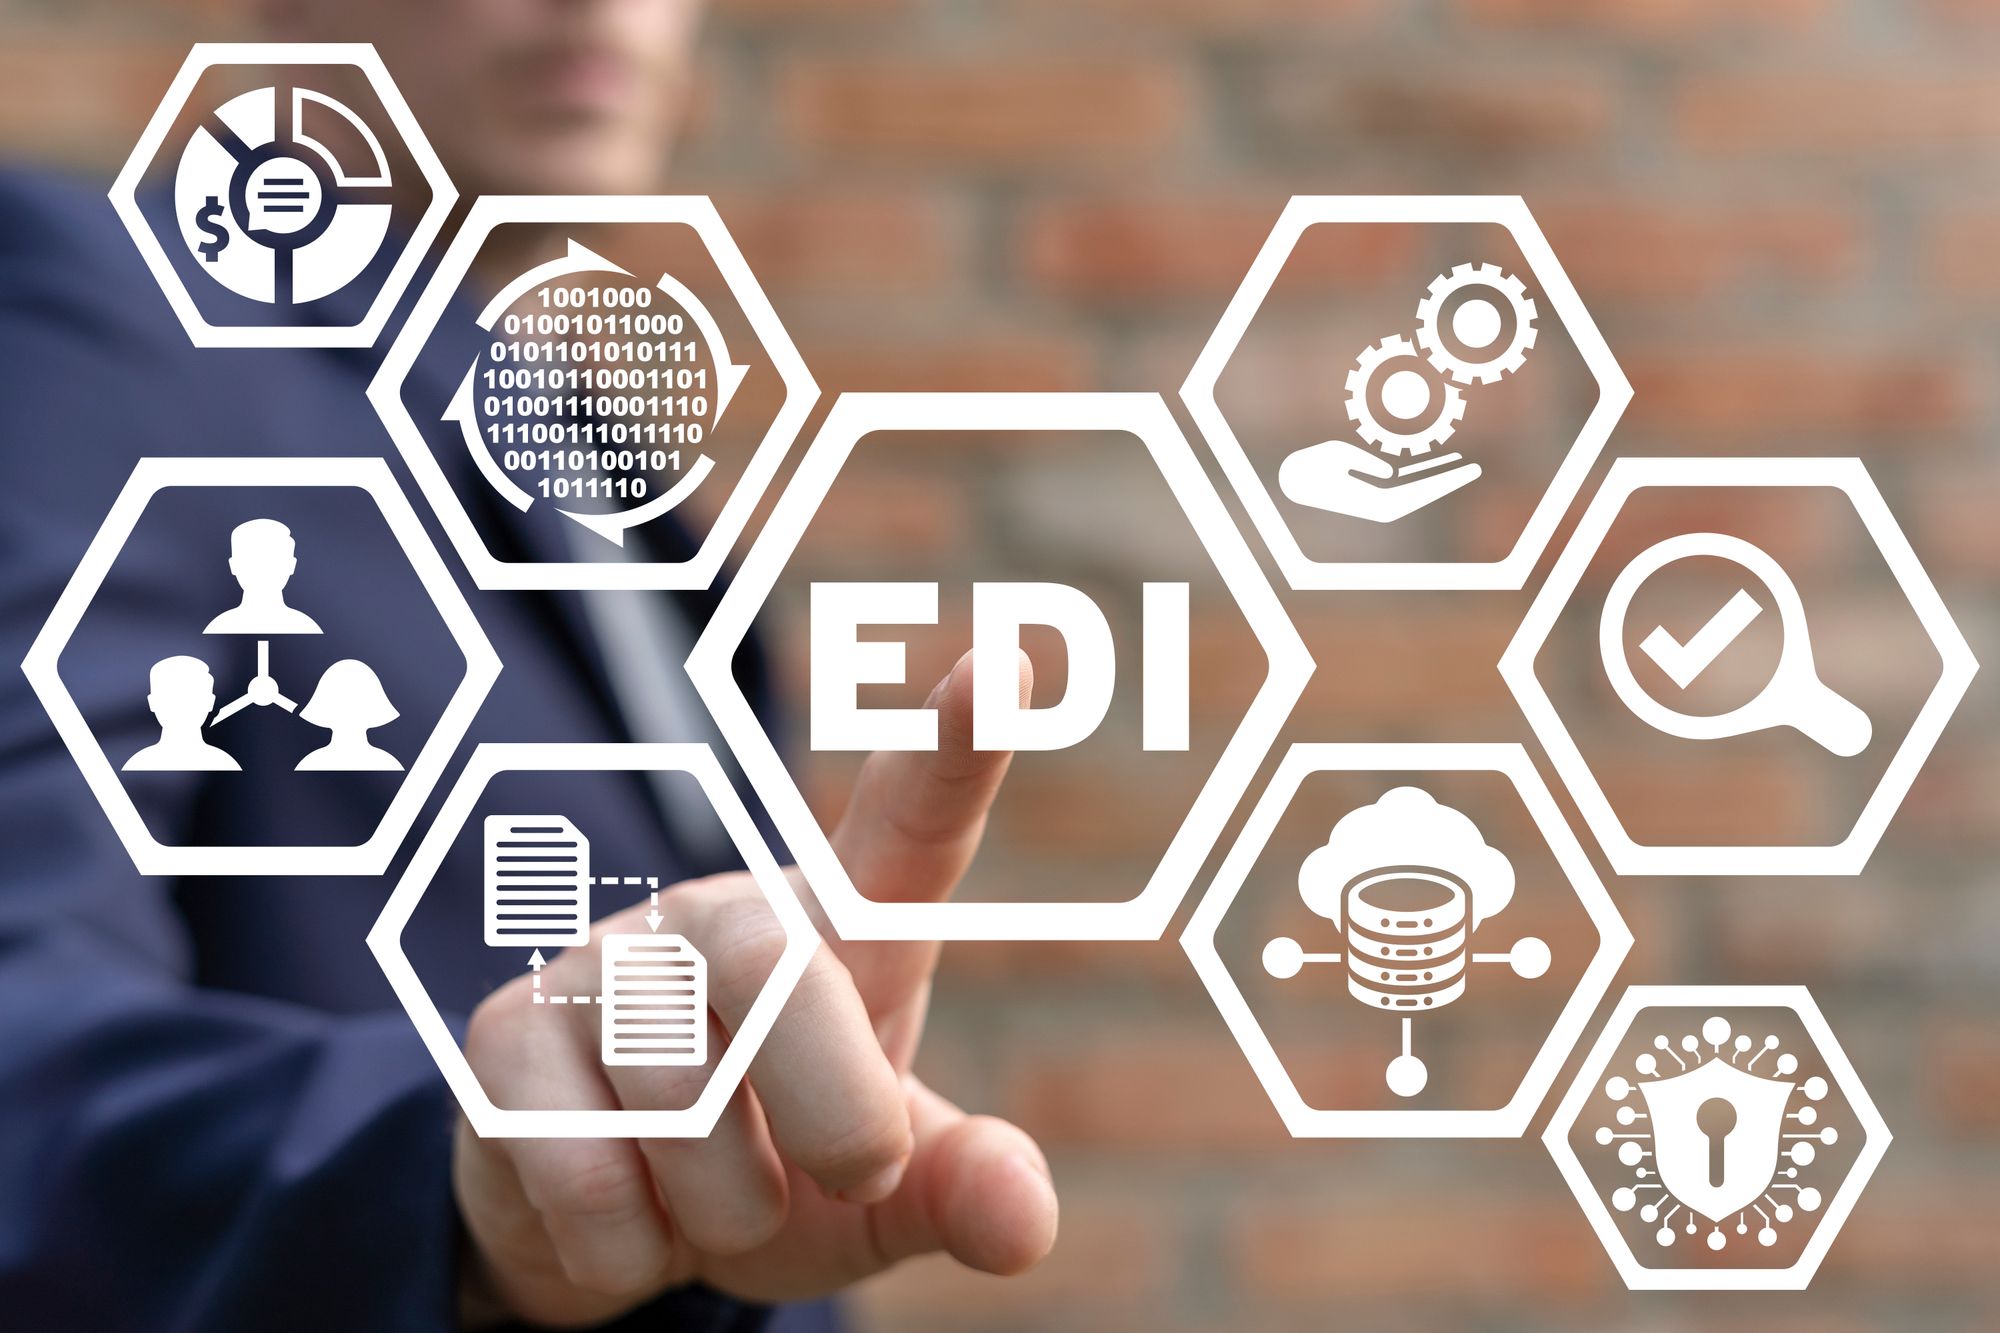 Electronic Data Interchange: A complete guide to EDI